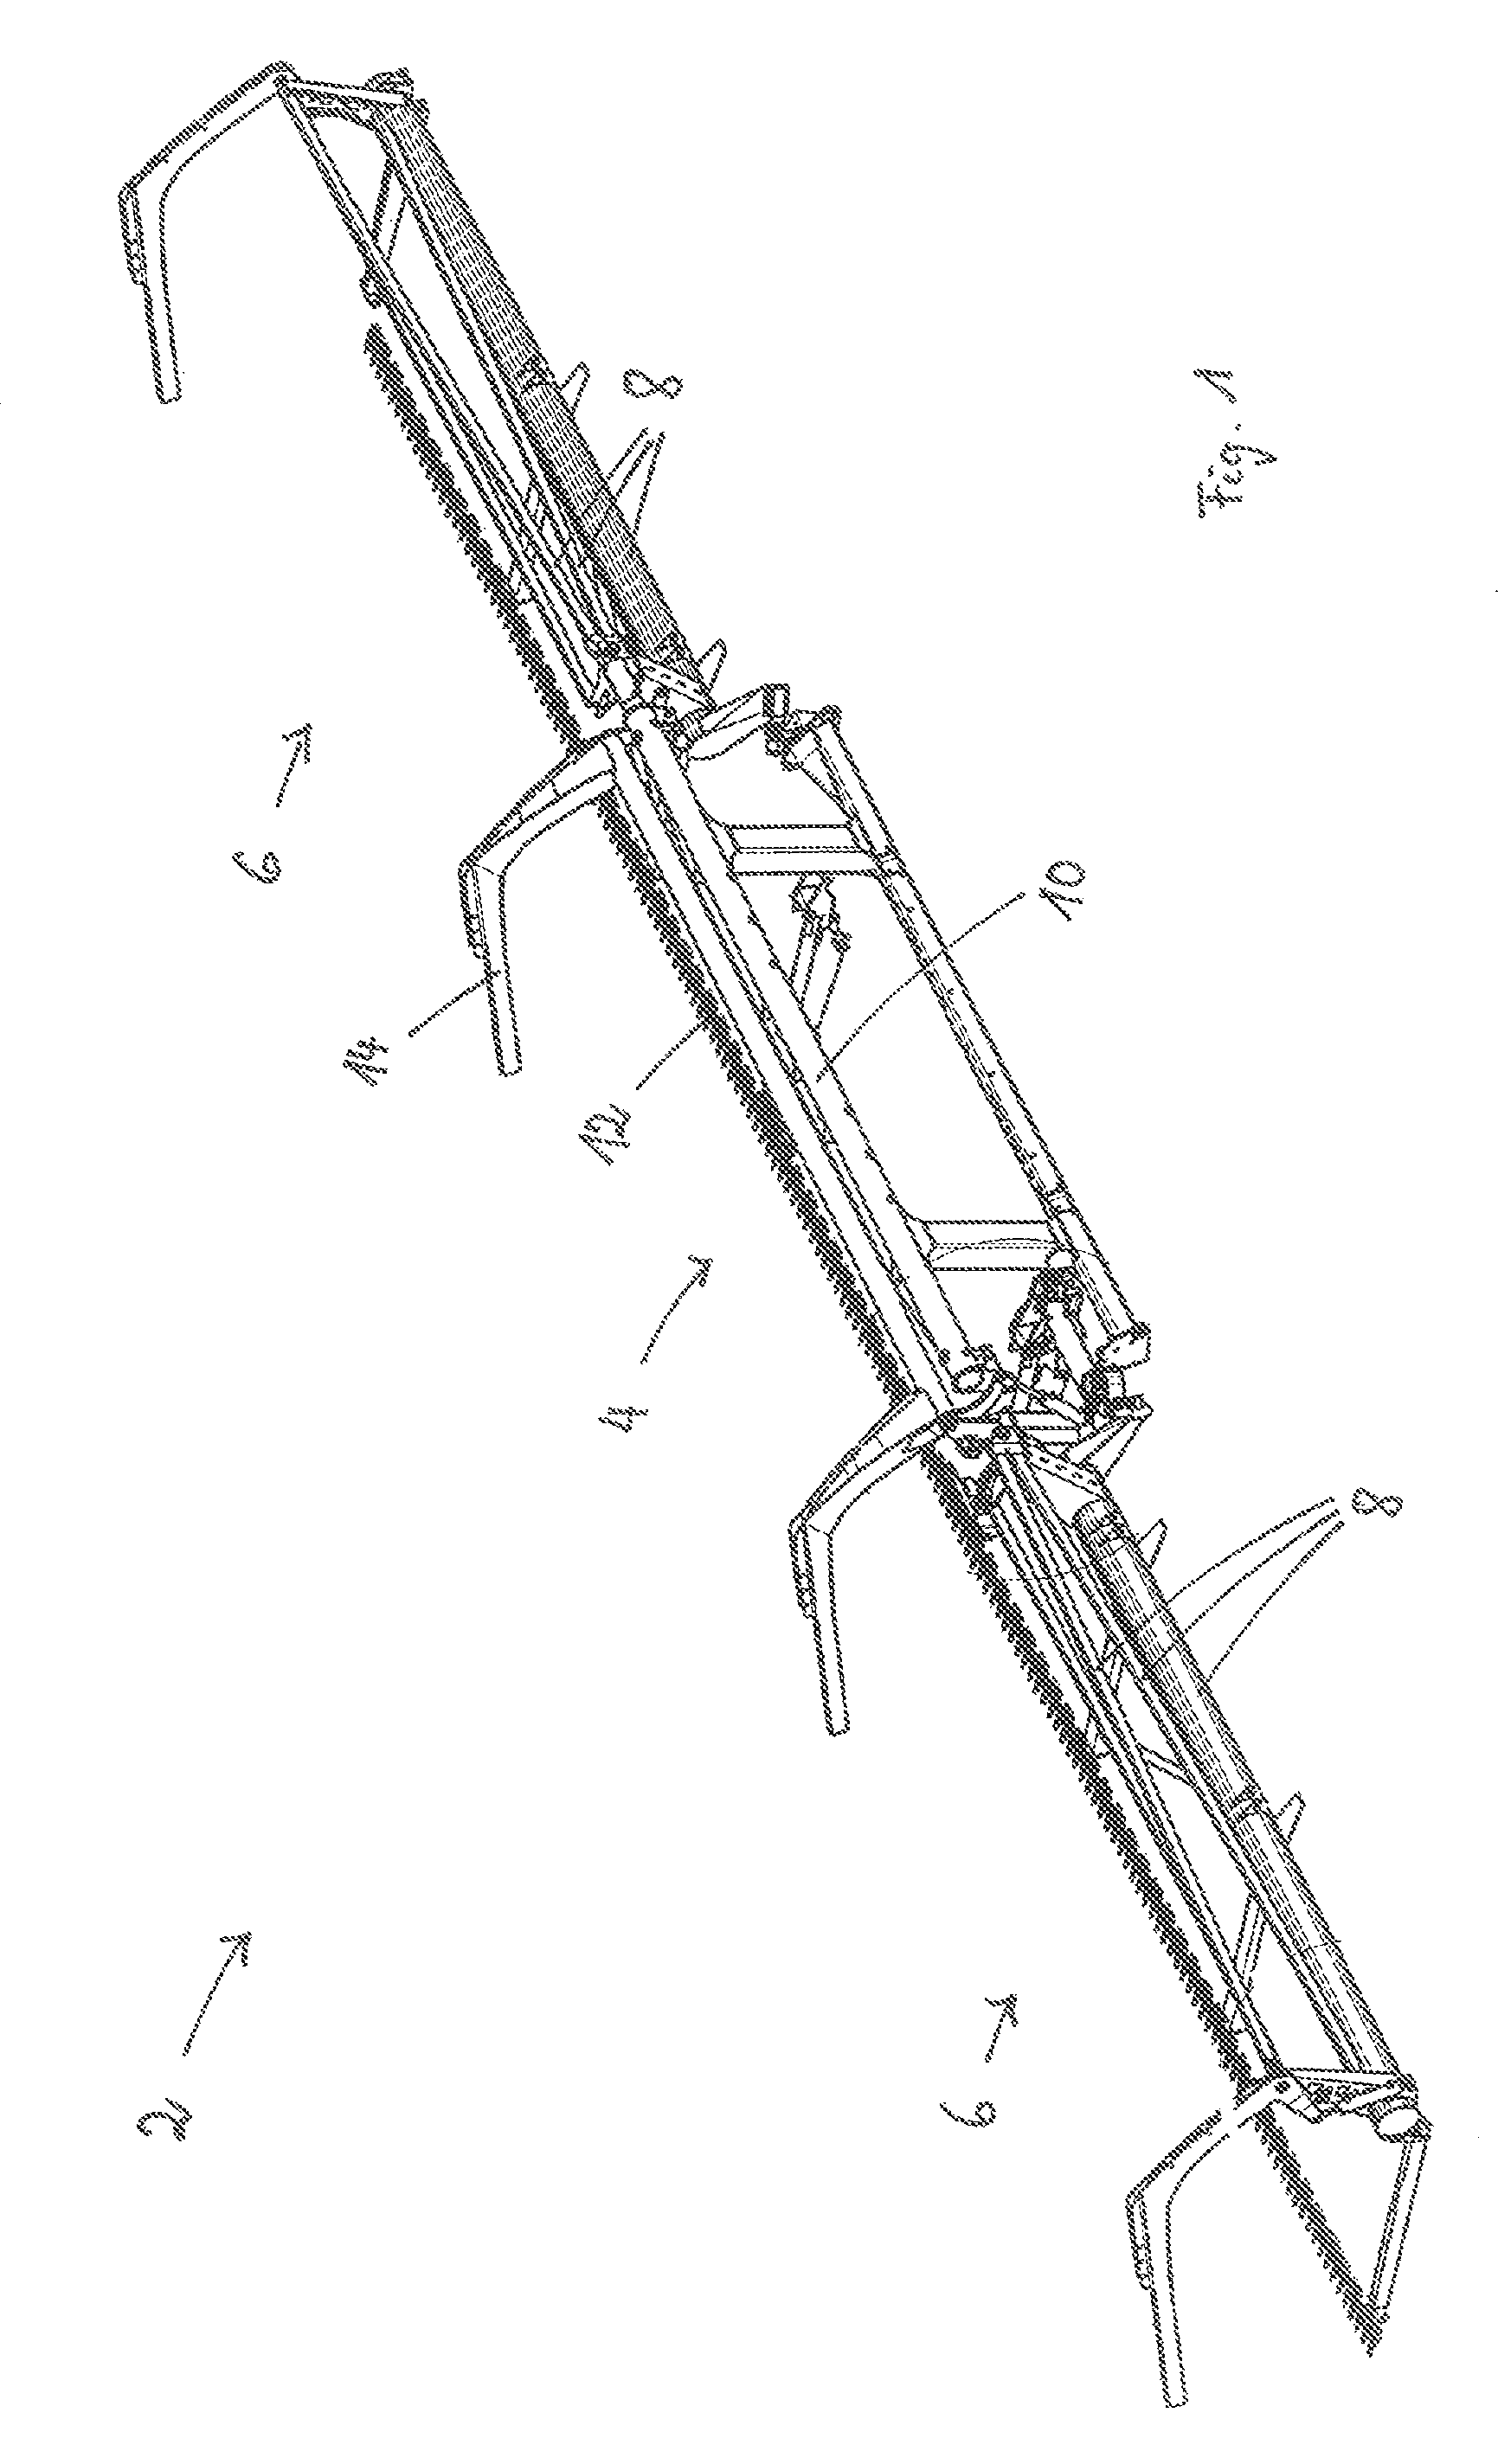 Header with center part and side parts adjustable relative to the center part